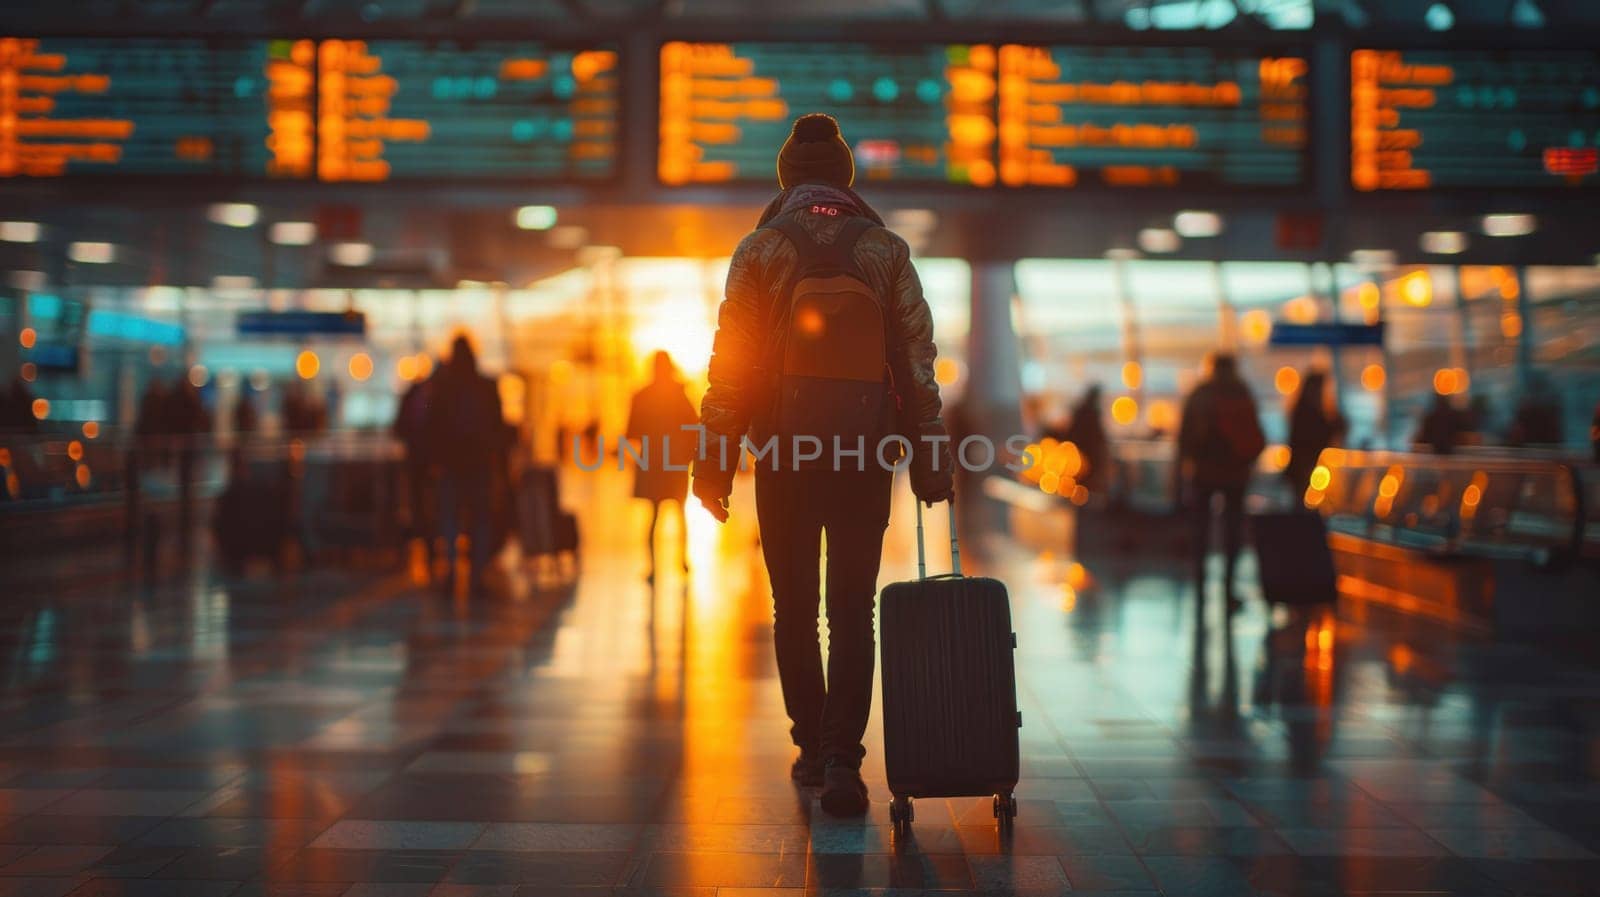 A man is walking through an airport with a suitcase and a backpack.